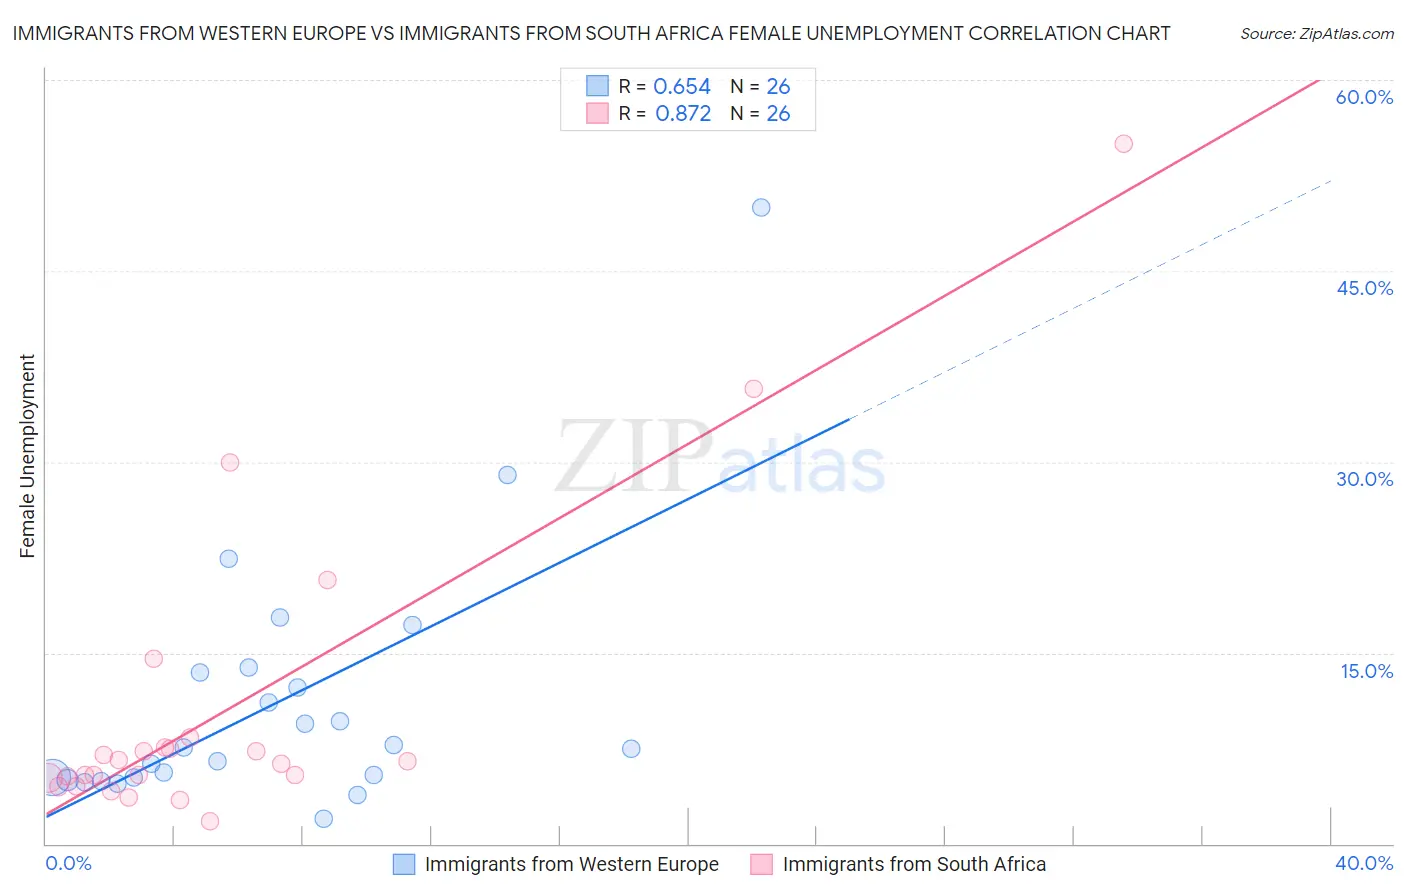 Immigrants from Western Europe vs Immigrants from South Africa Female Unemployment